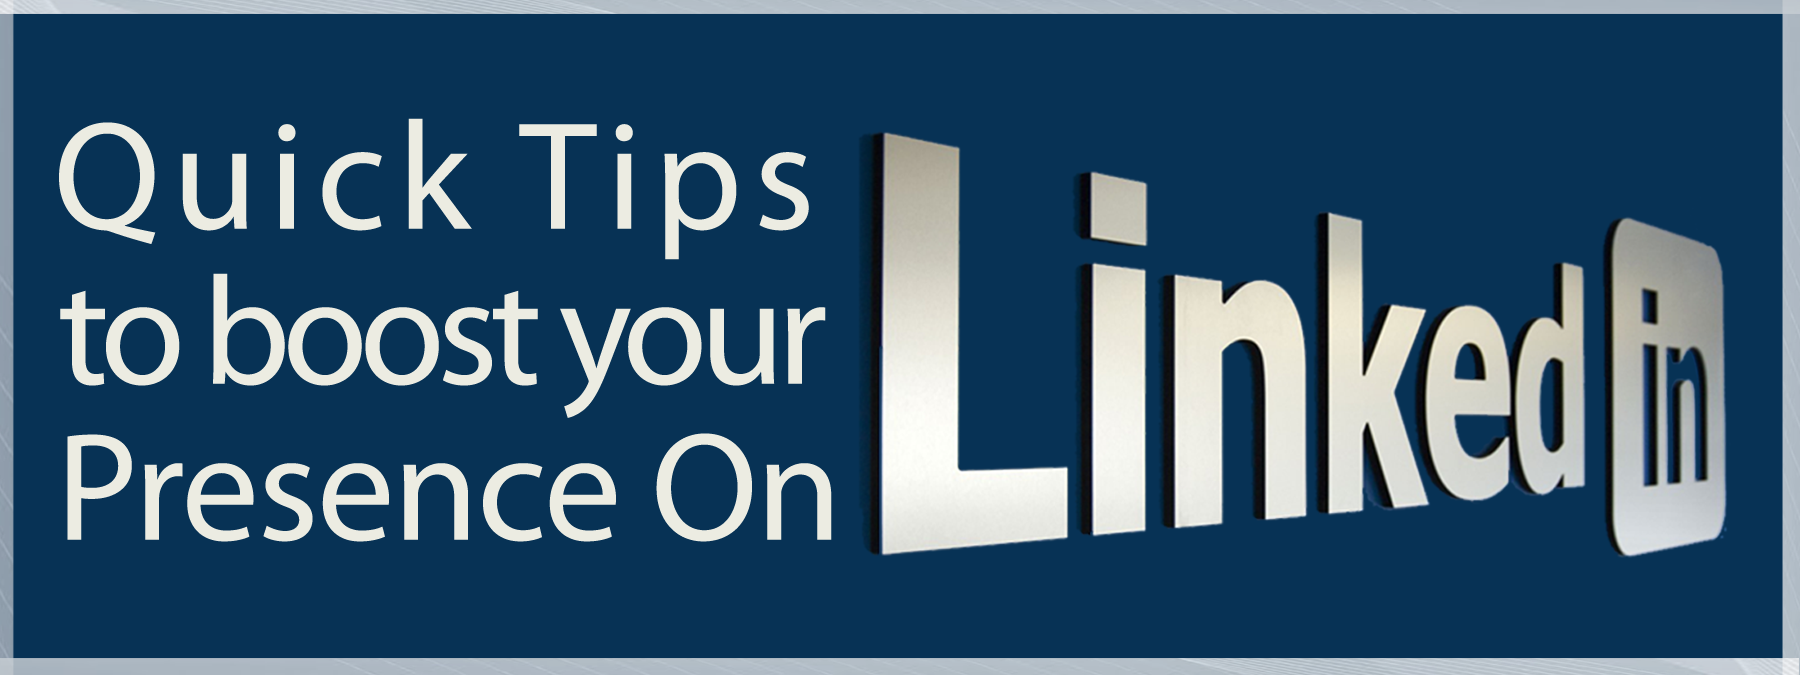 Quick Tips to Boost Your Presence on LinkedIn